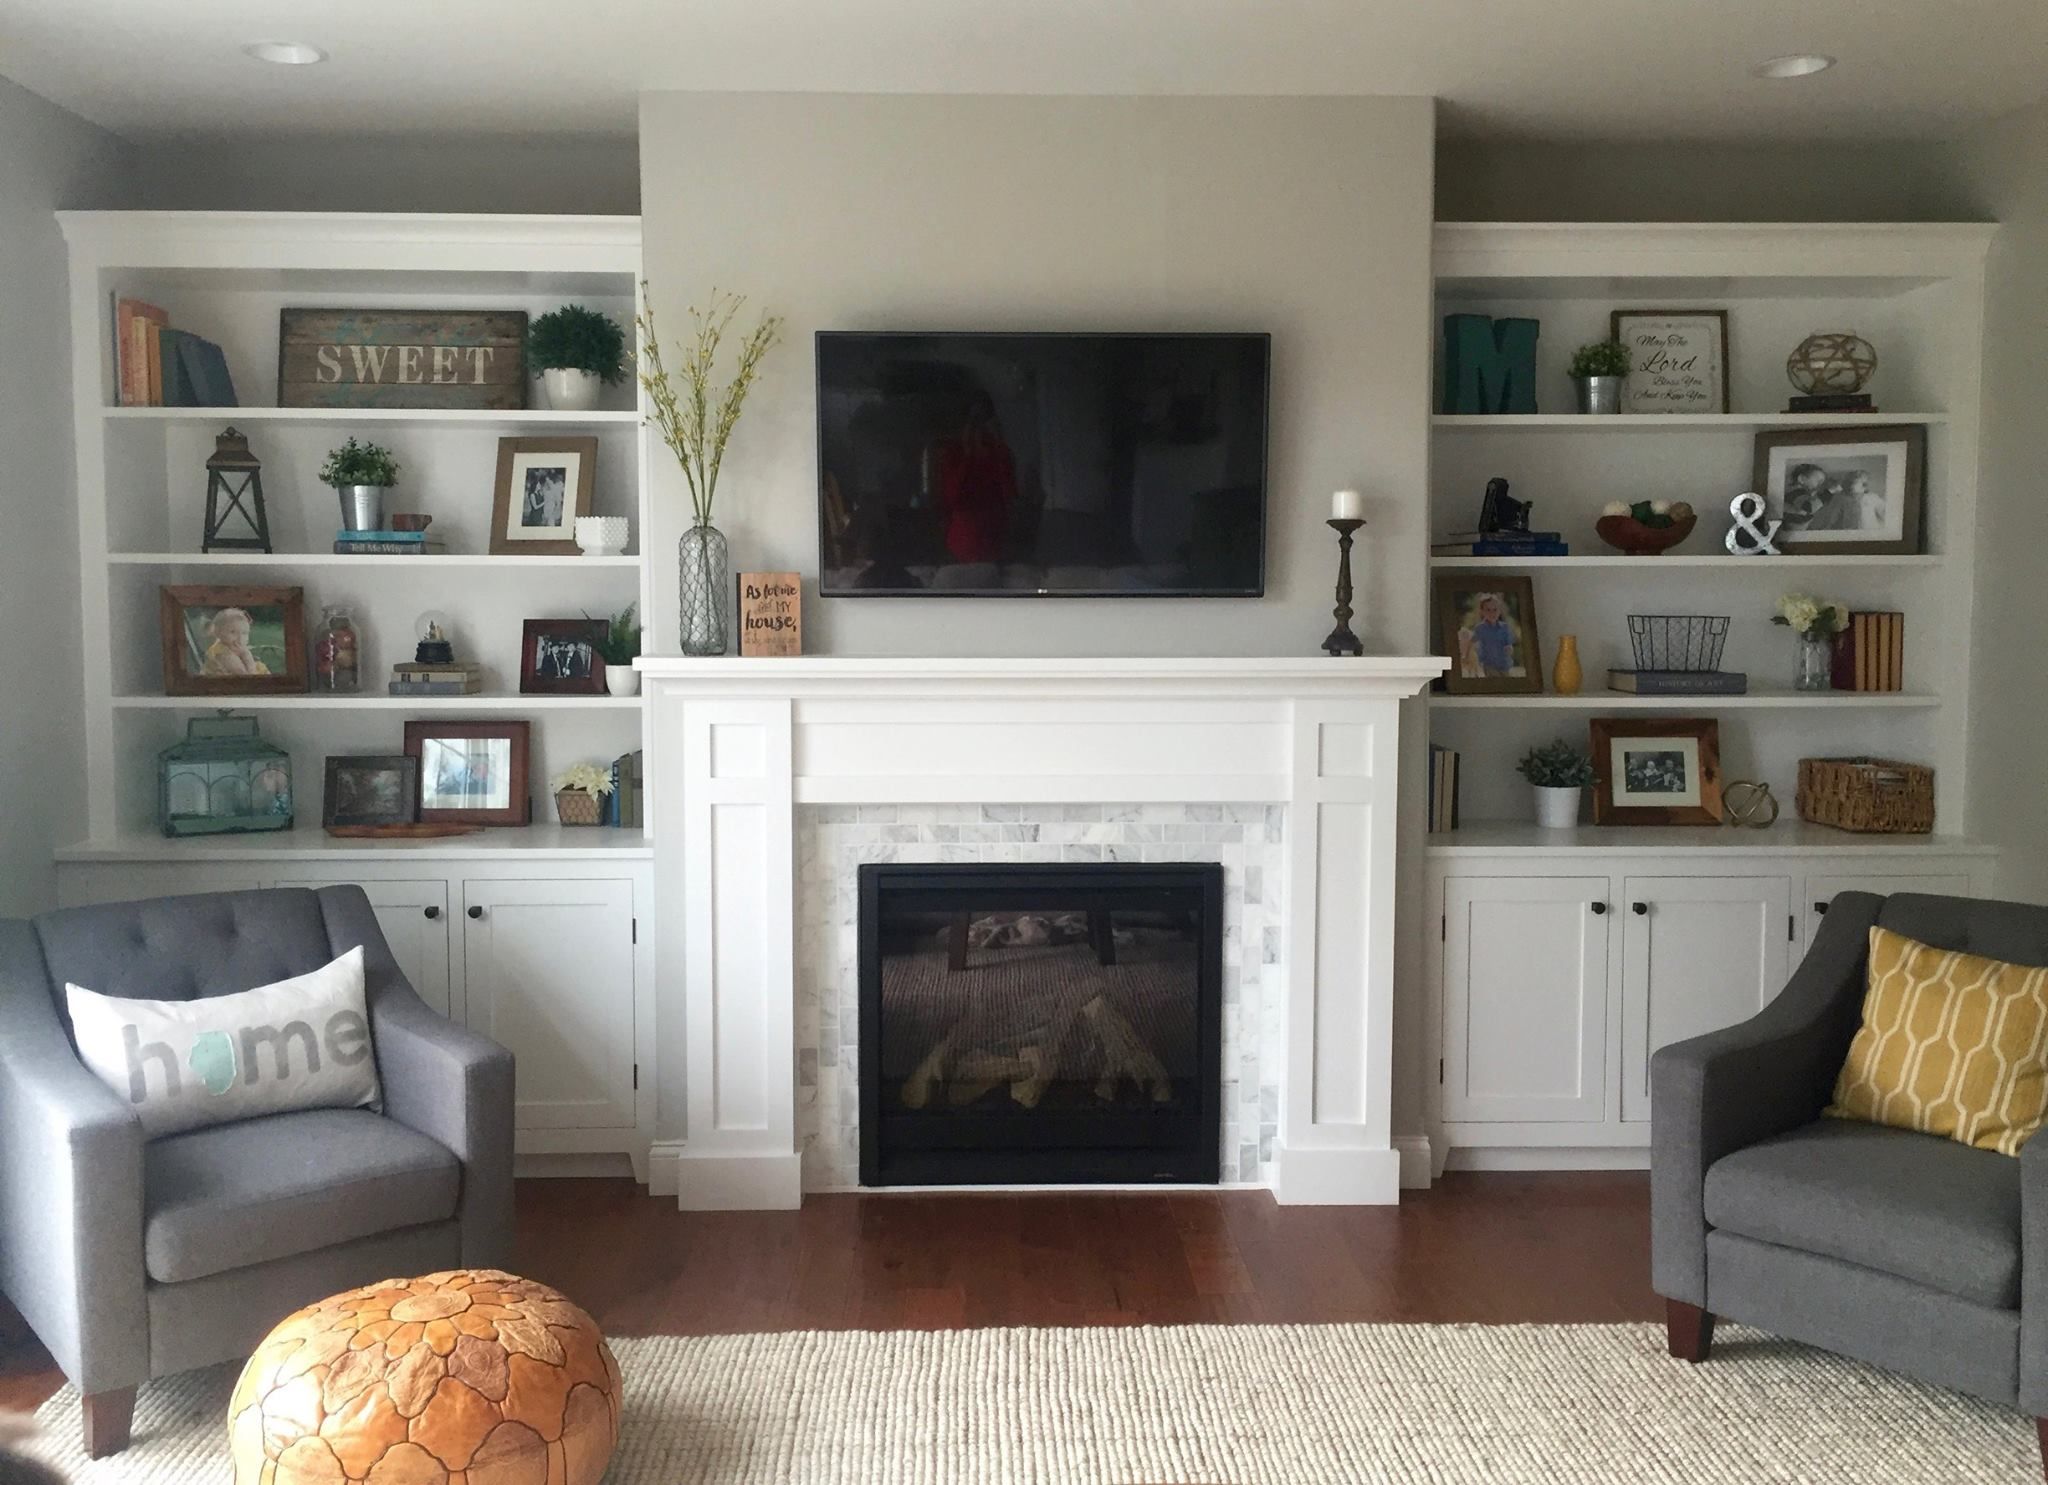 Tv Above Fireplace Decorating Ideas Lovely Instructions to Build This Fireplace Mantel with Built In